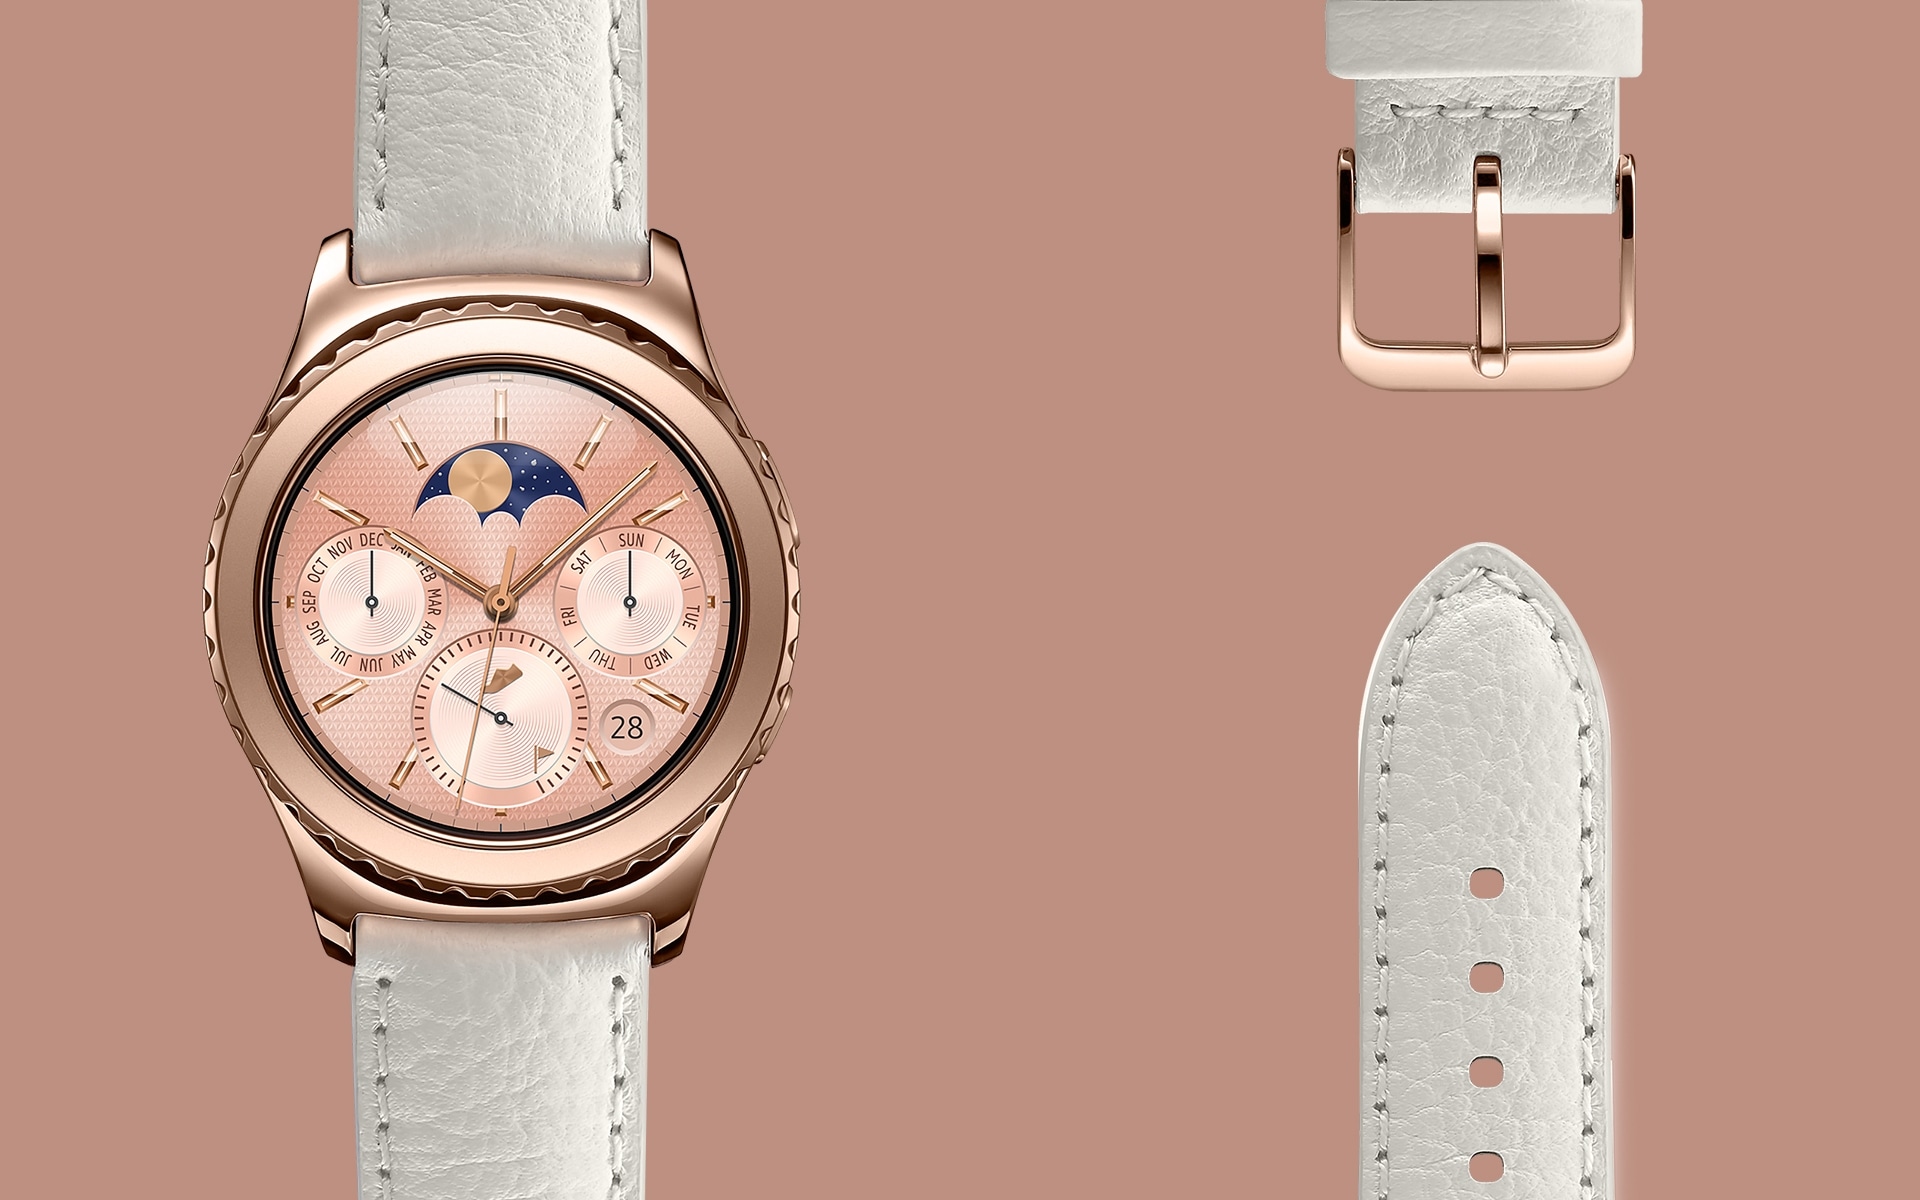 An image showing the Gear S2 classic, half of which is shown in rose gold and half of which is shown in platinum plated colour.